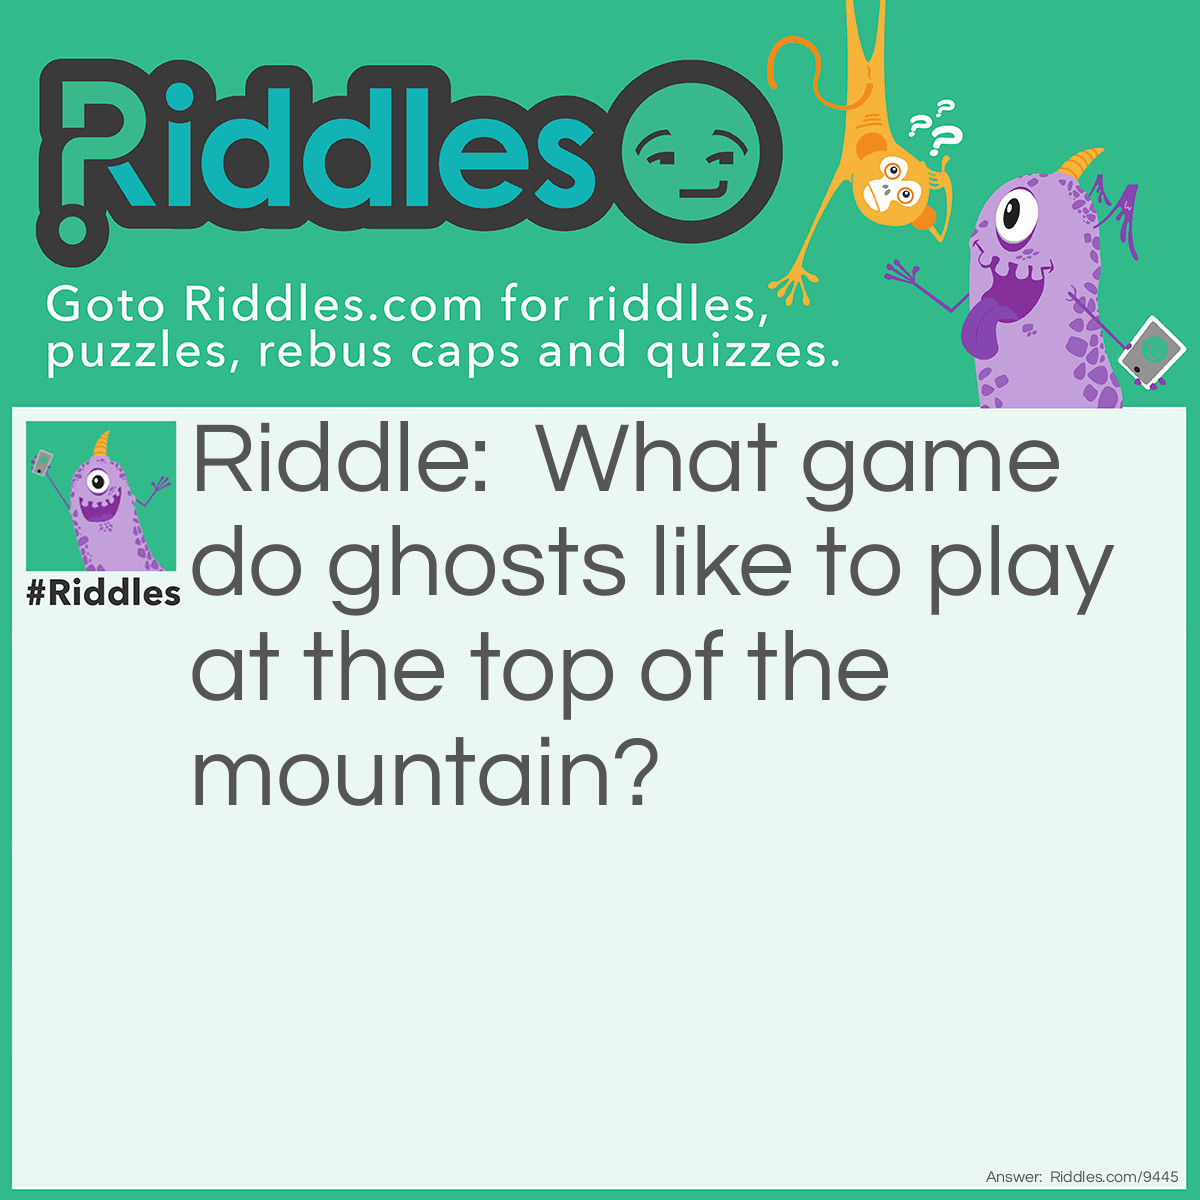 Riddle: What game do ghosts like to play at the top of the mountain? Answer: Peak-a-boo!